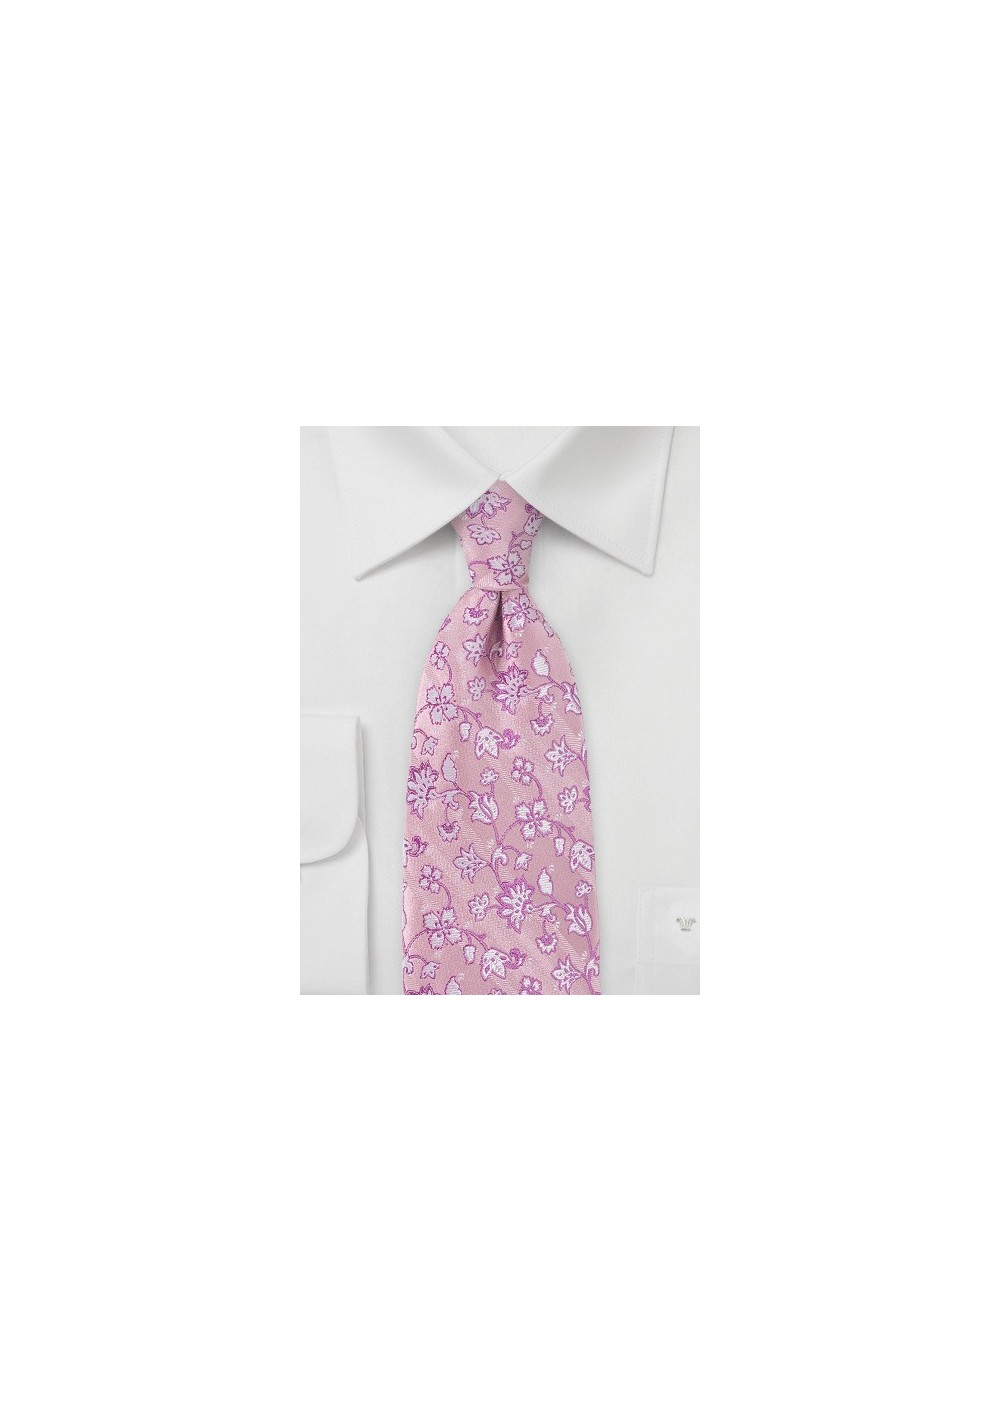 Embroidered Floral Tie in Pinks